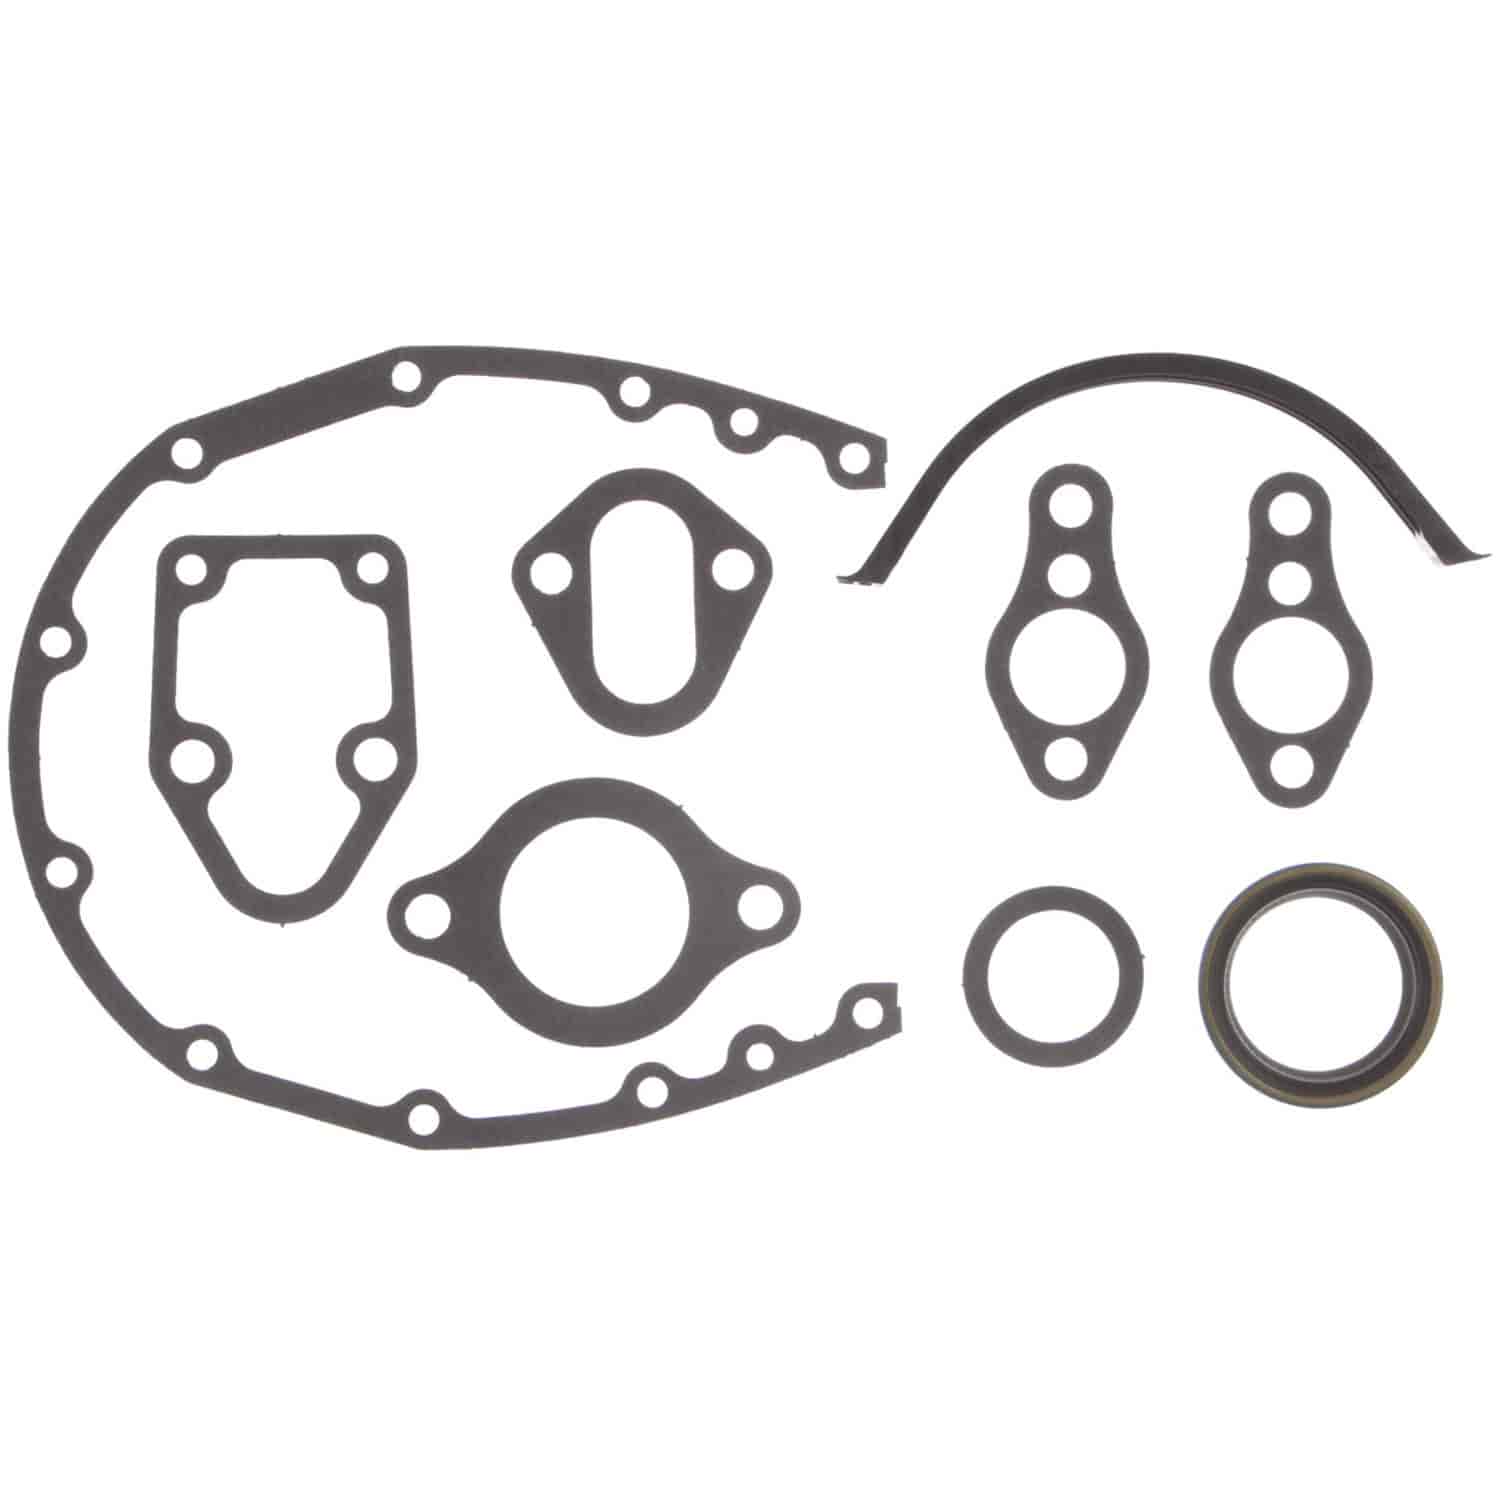 Timing Cover Gasket Set 1955-1974 Small Block Chevy